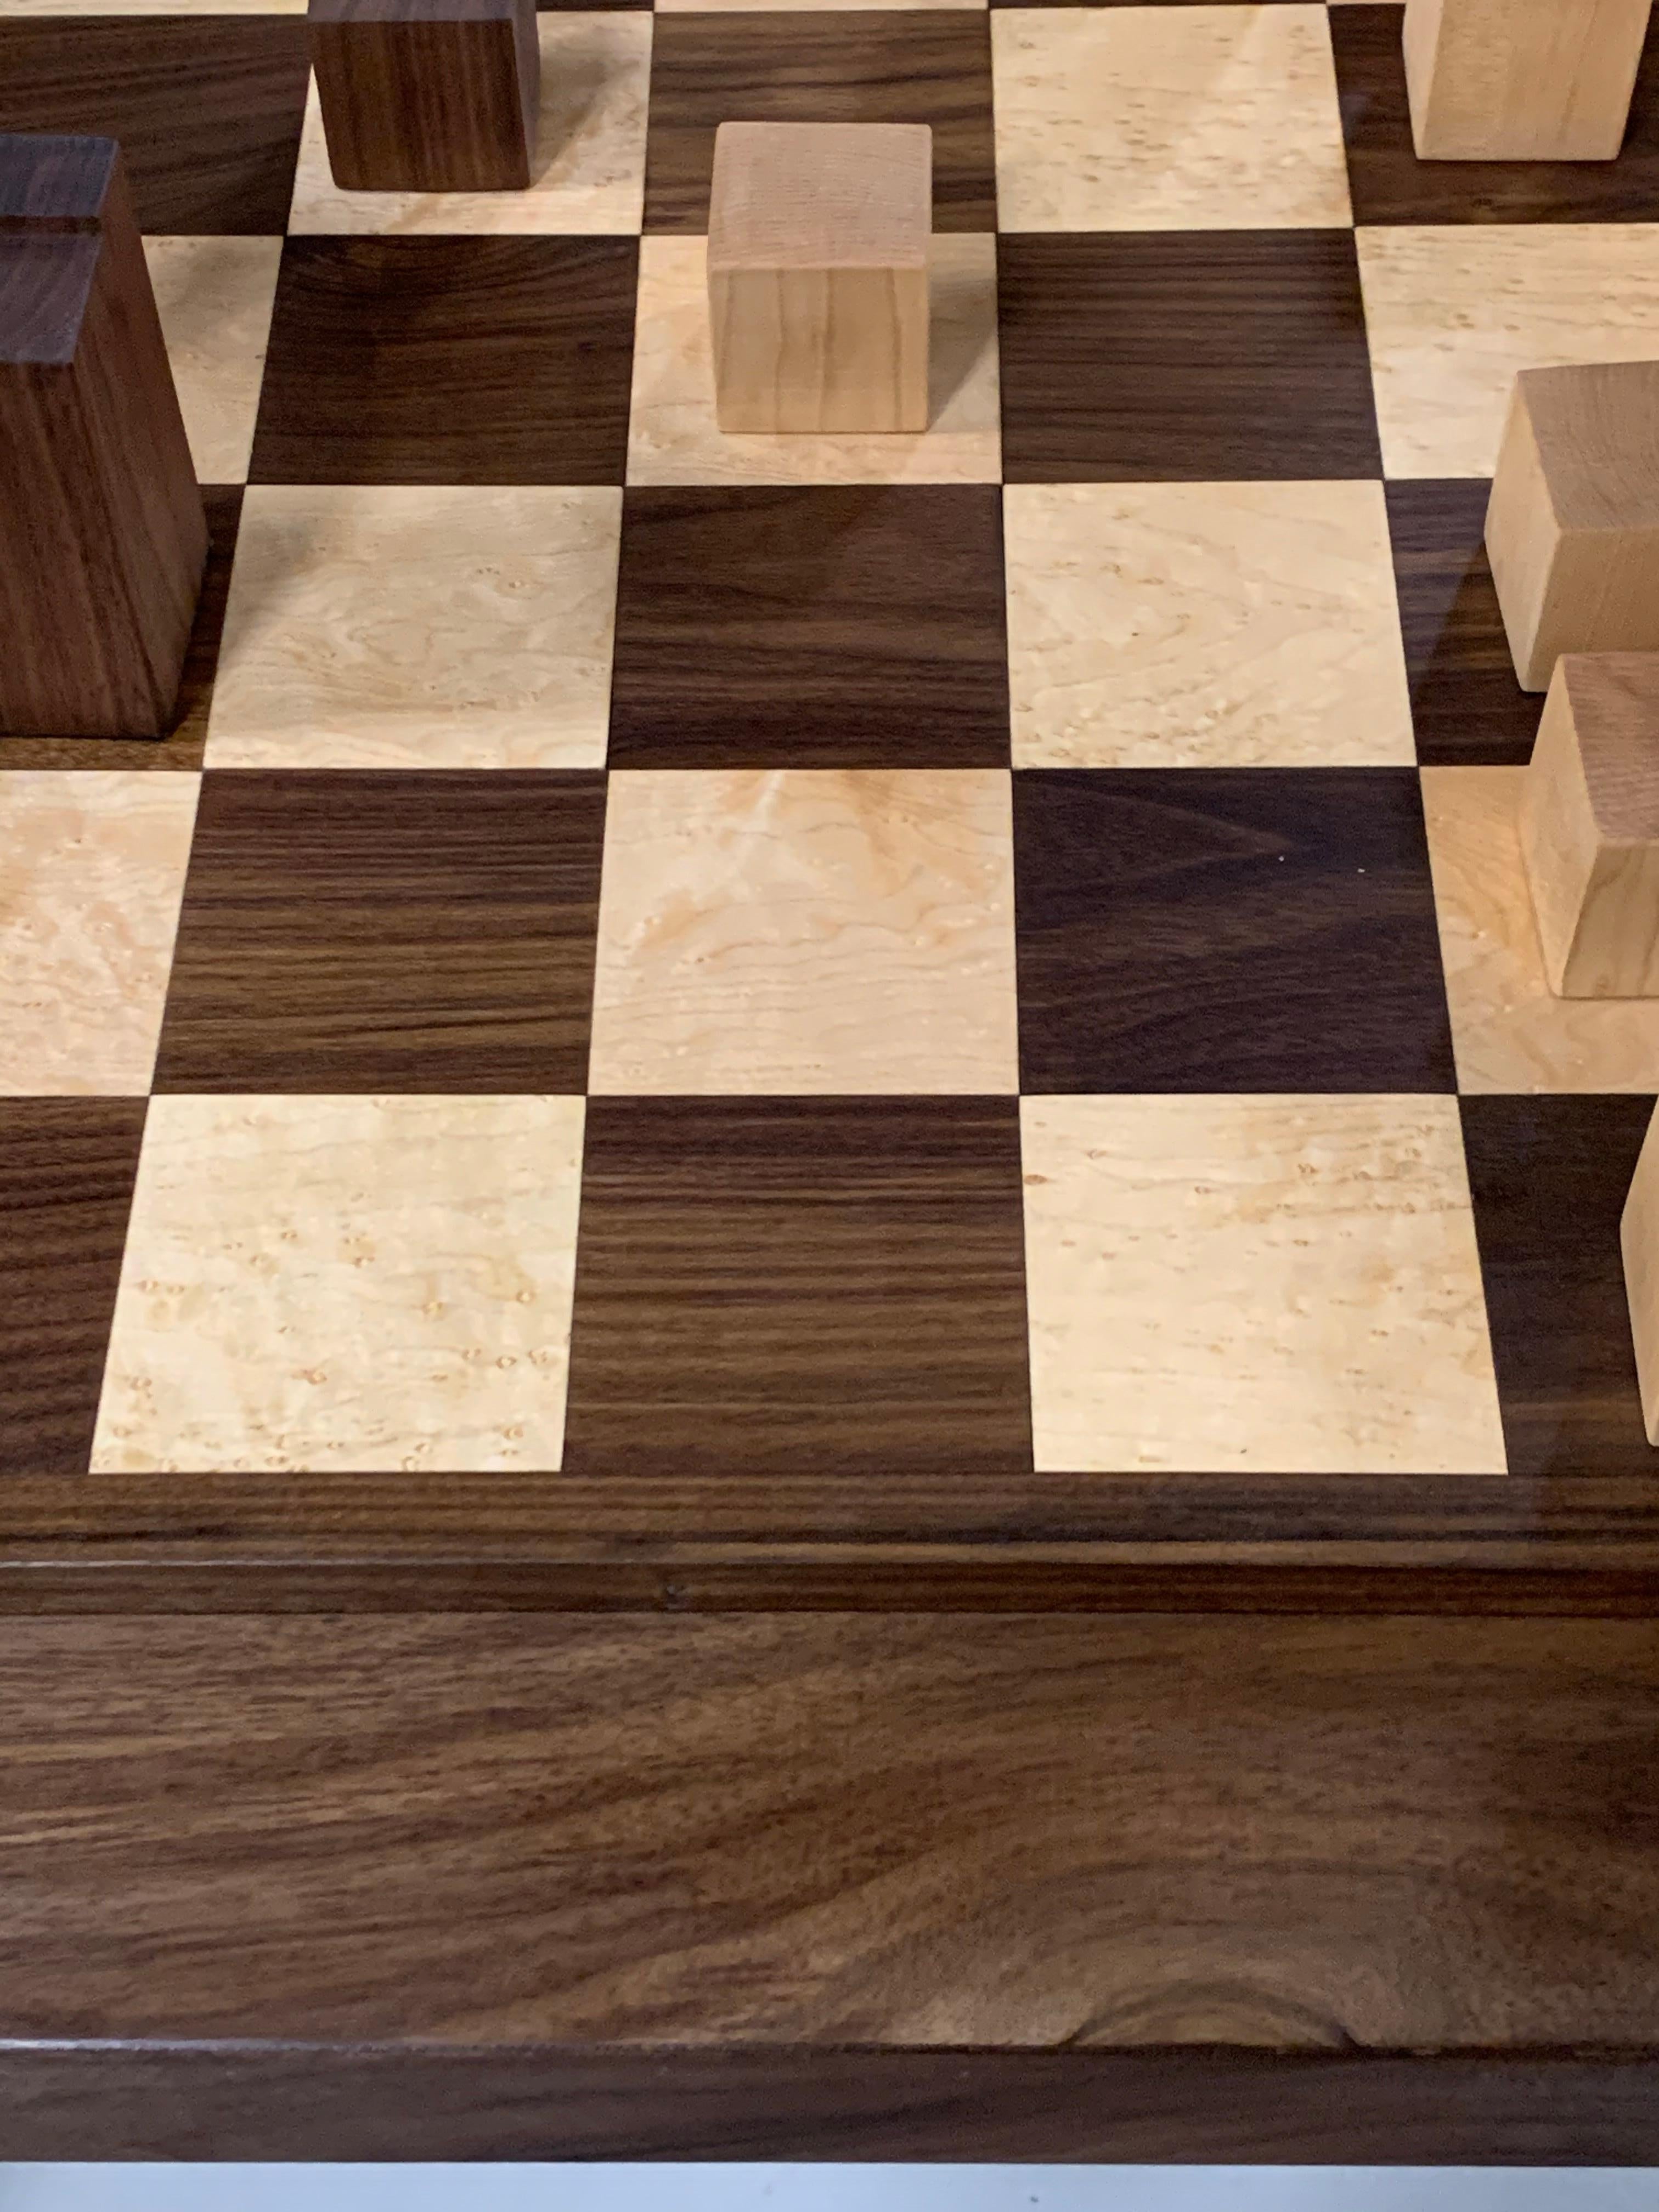 Hand-Crafted Custom Chess Set and Game Table For Sale